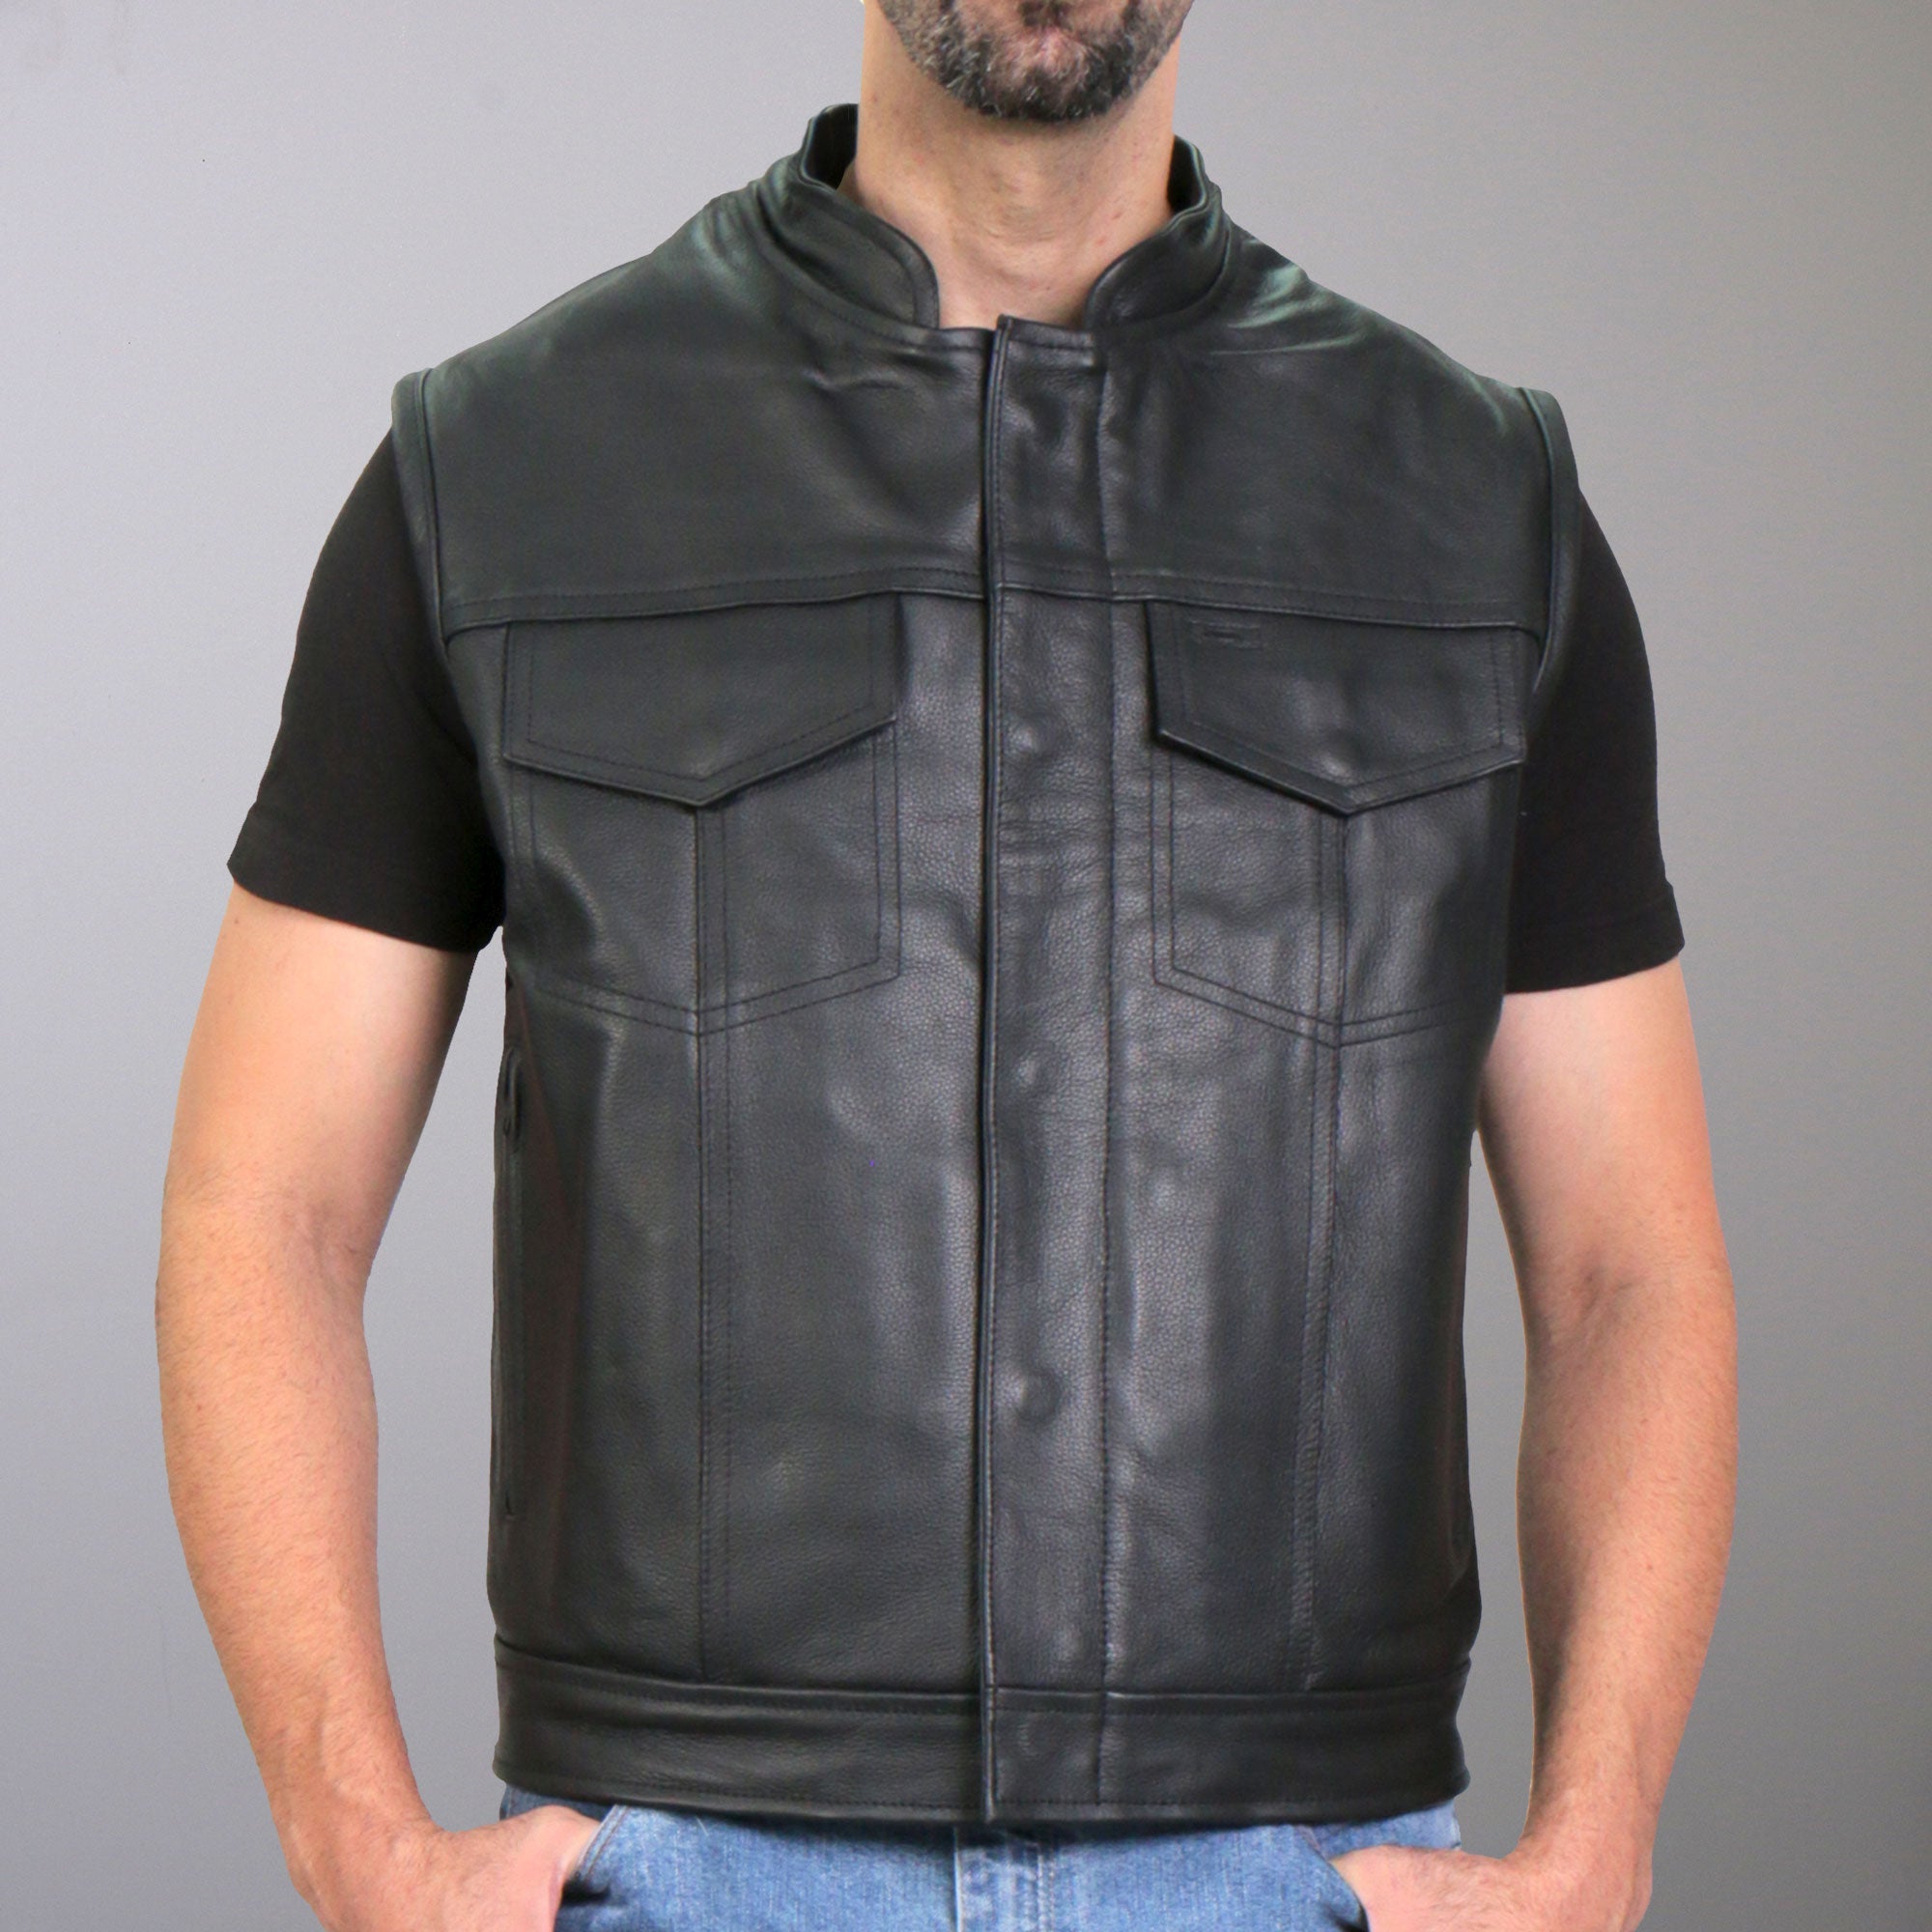 Hot Leathers VSM1058 Men's Black 'Camo Flag' Motorcycle Club Style Conceal and Carry Leather Biker Vest